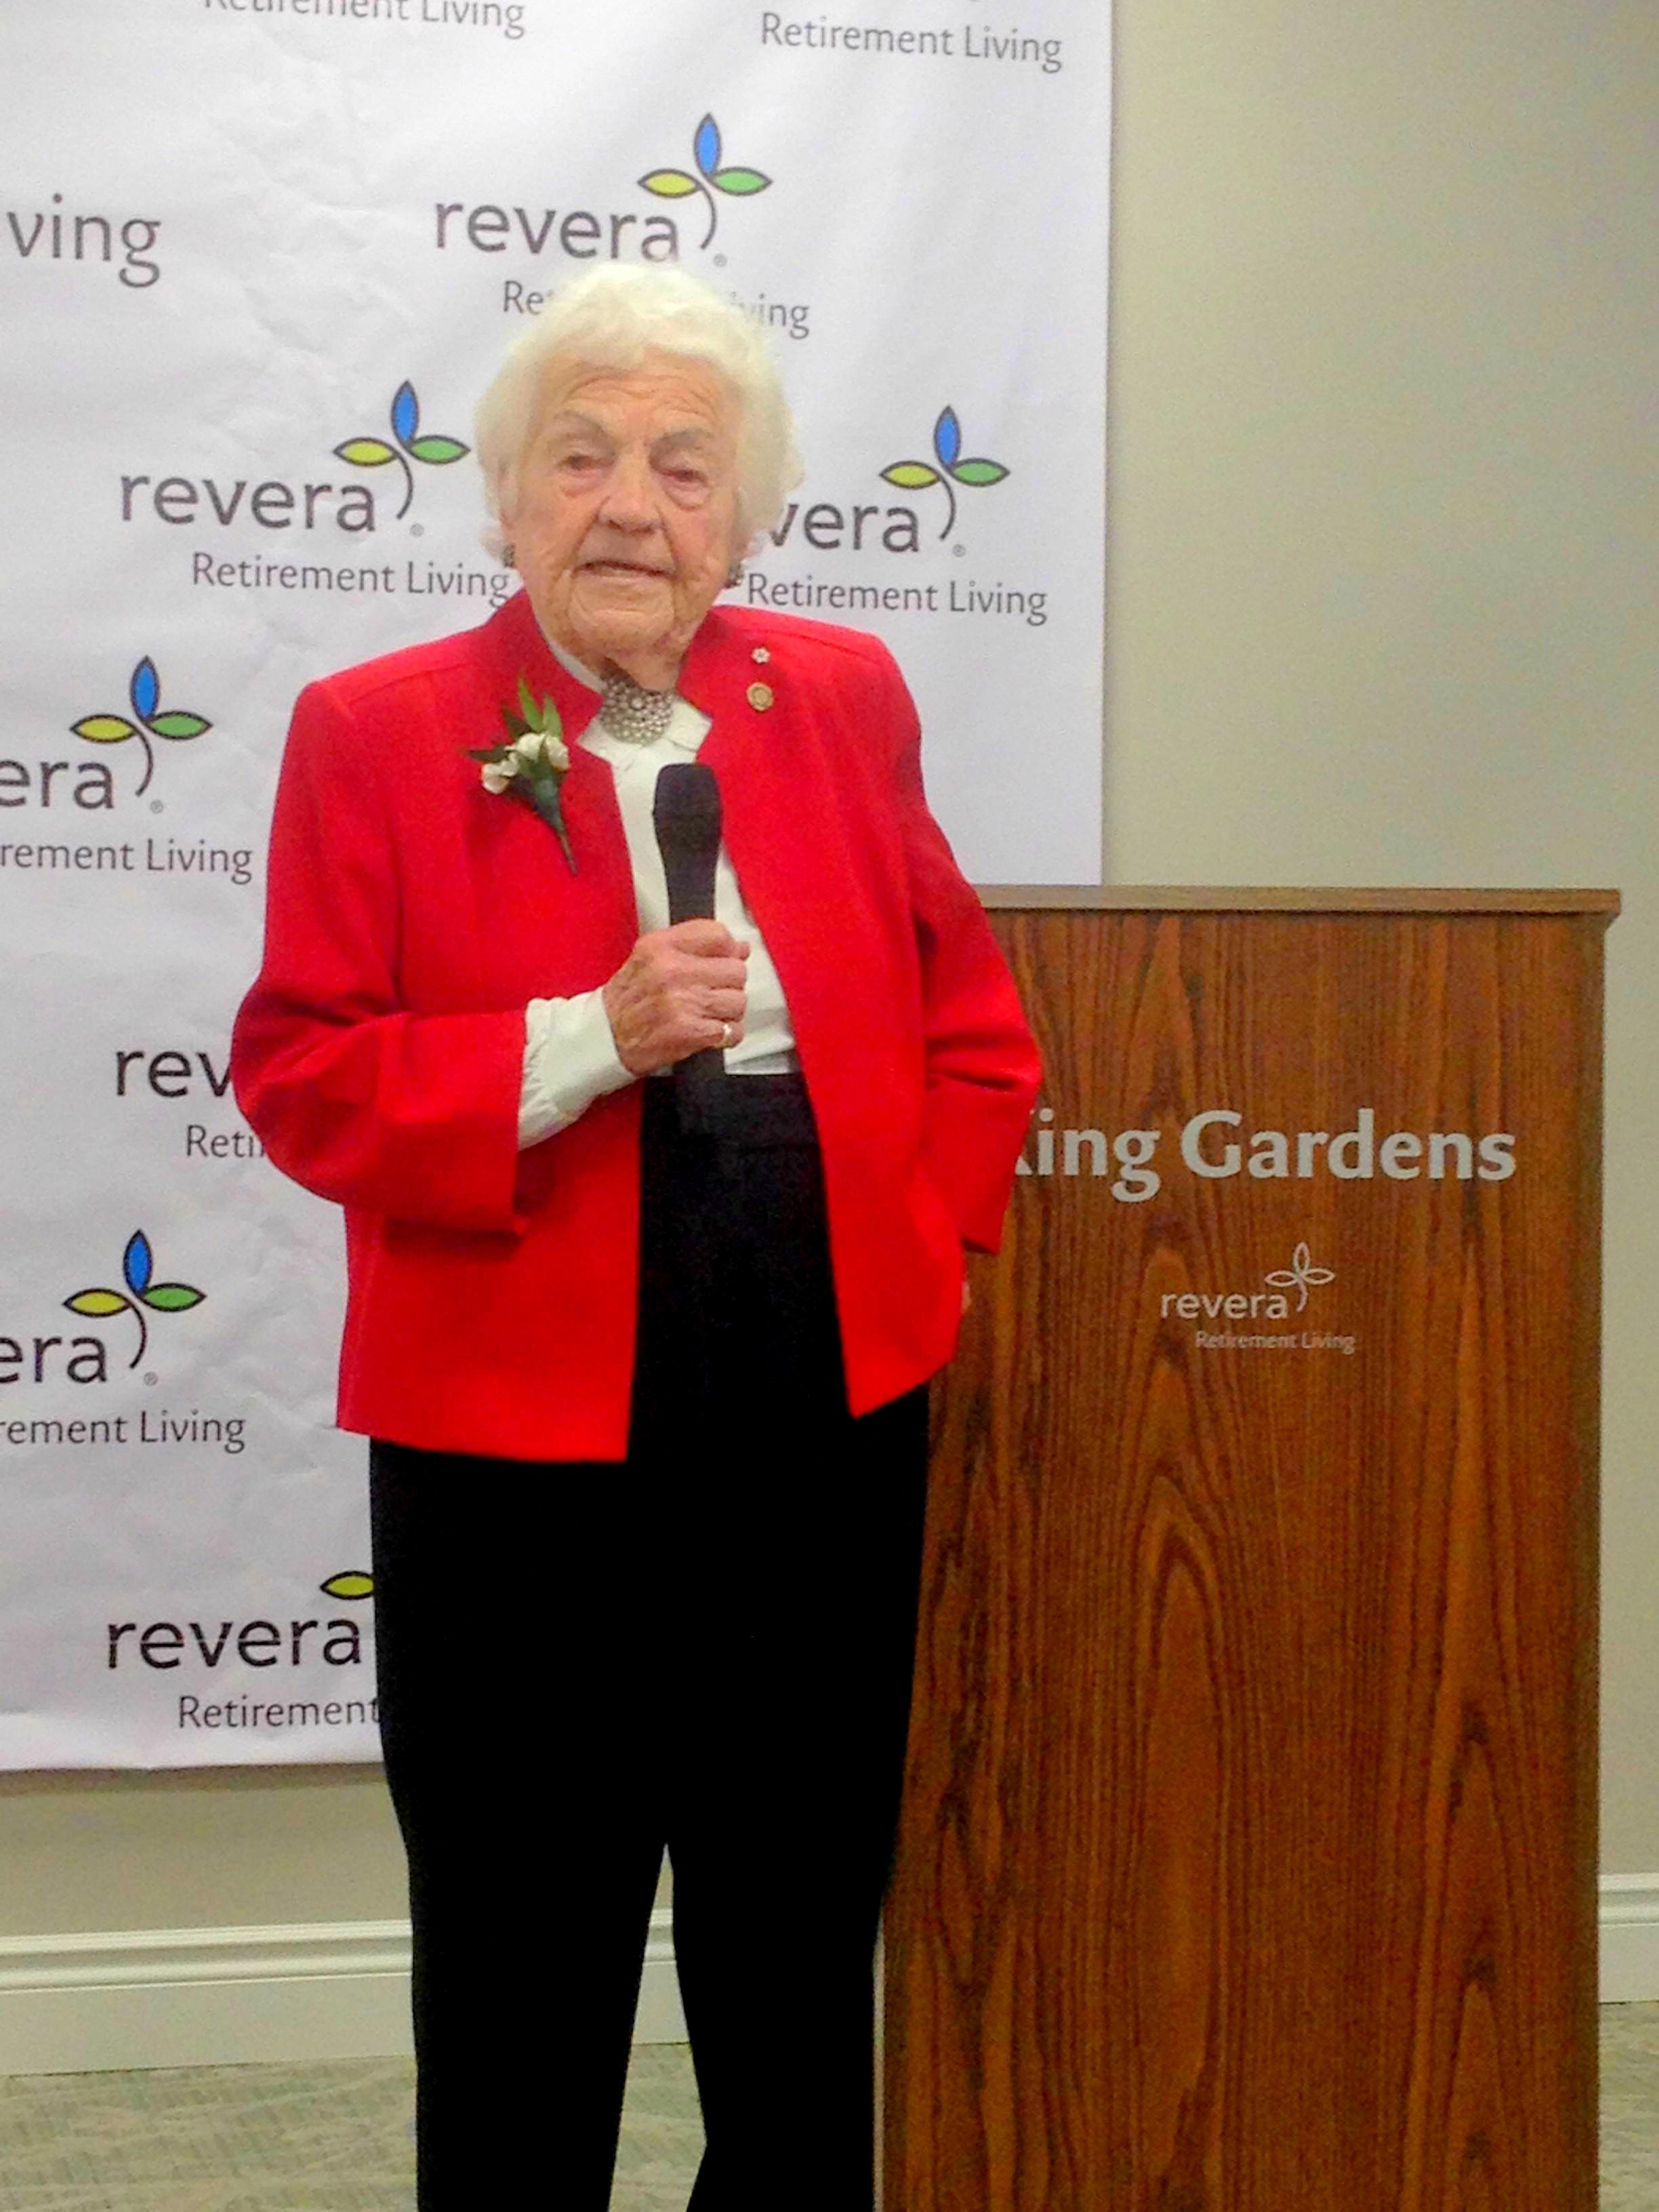 Hazel McCallion at Grand Reopening of Revera King Gardens, 5 April 2018. Photo credits: Alex Gregory, Peel Daily News